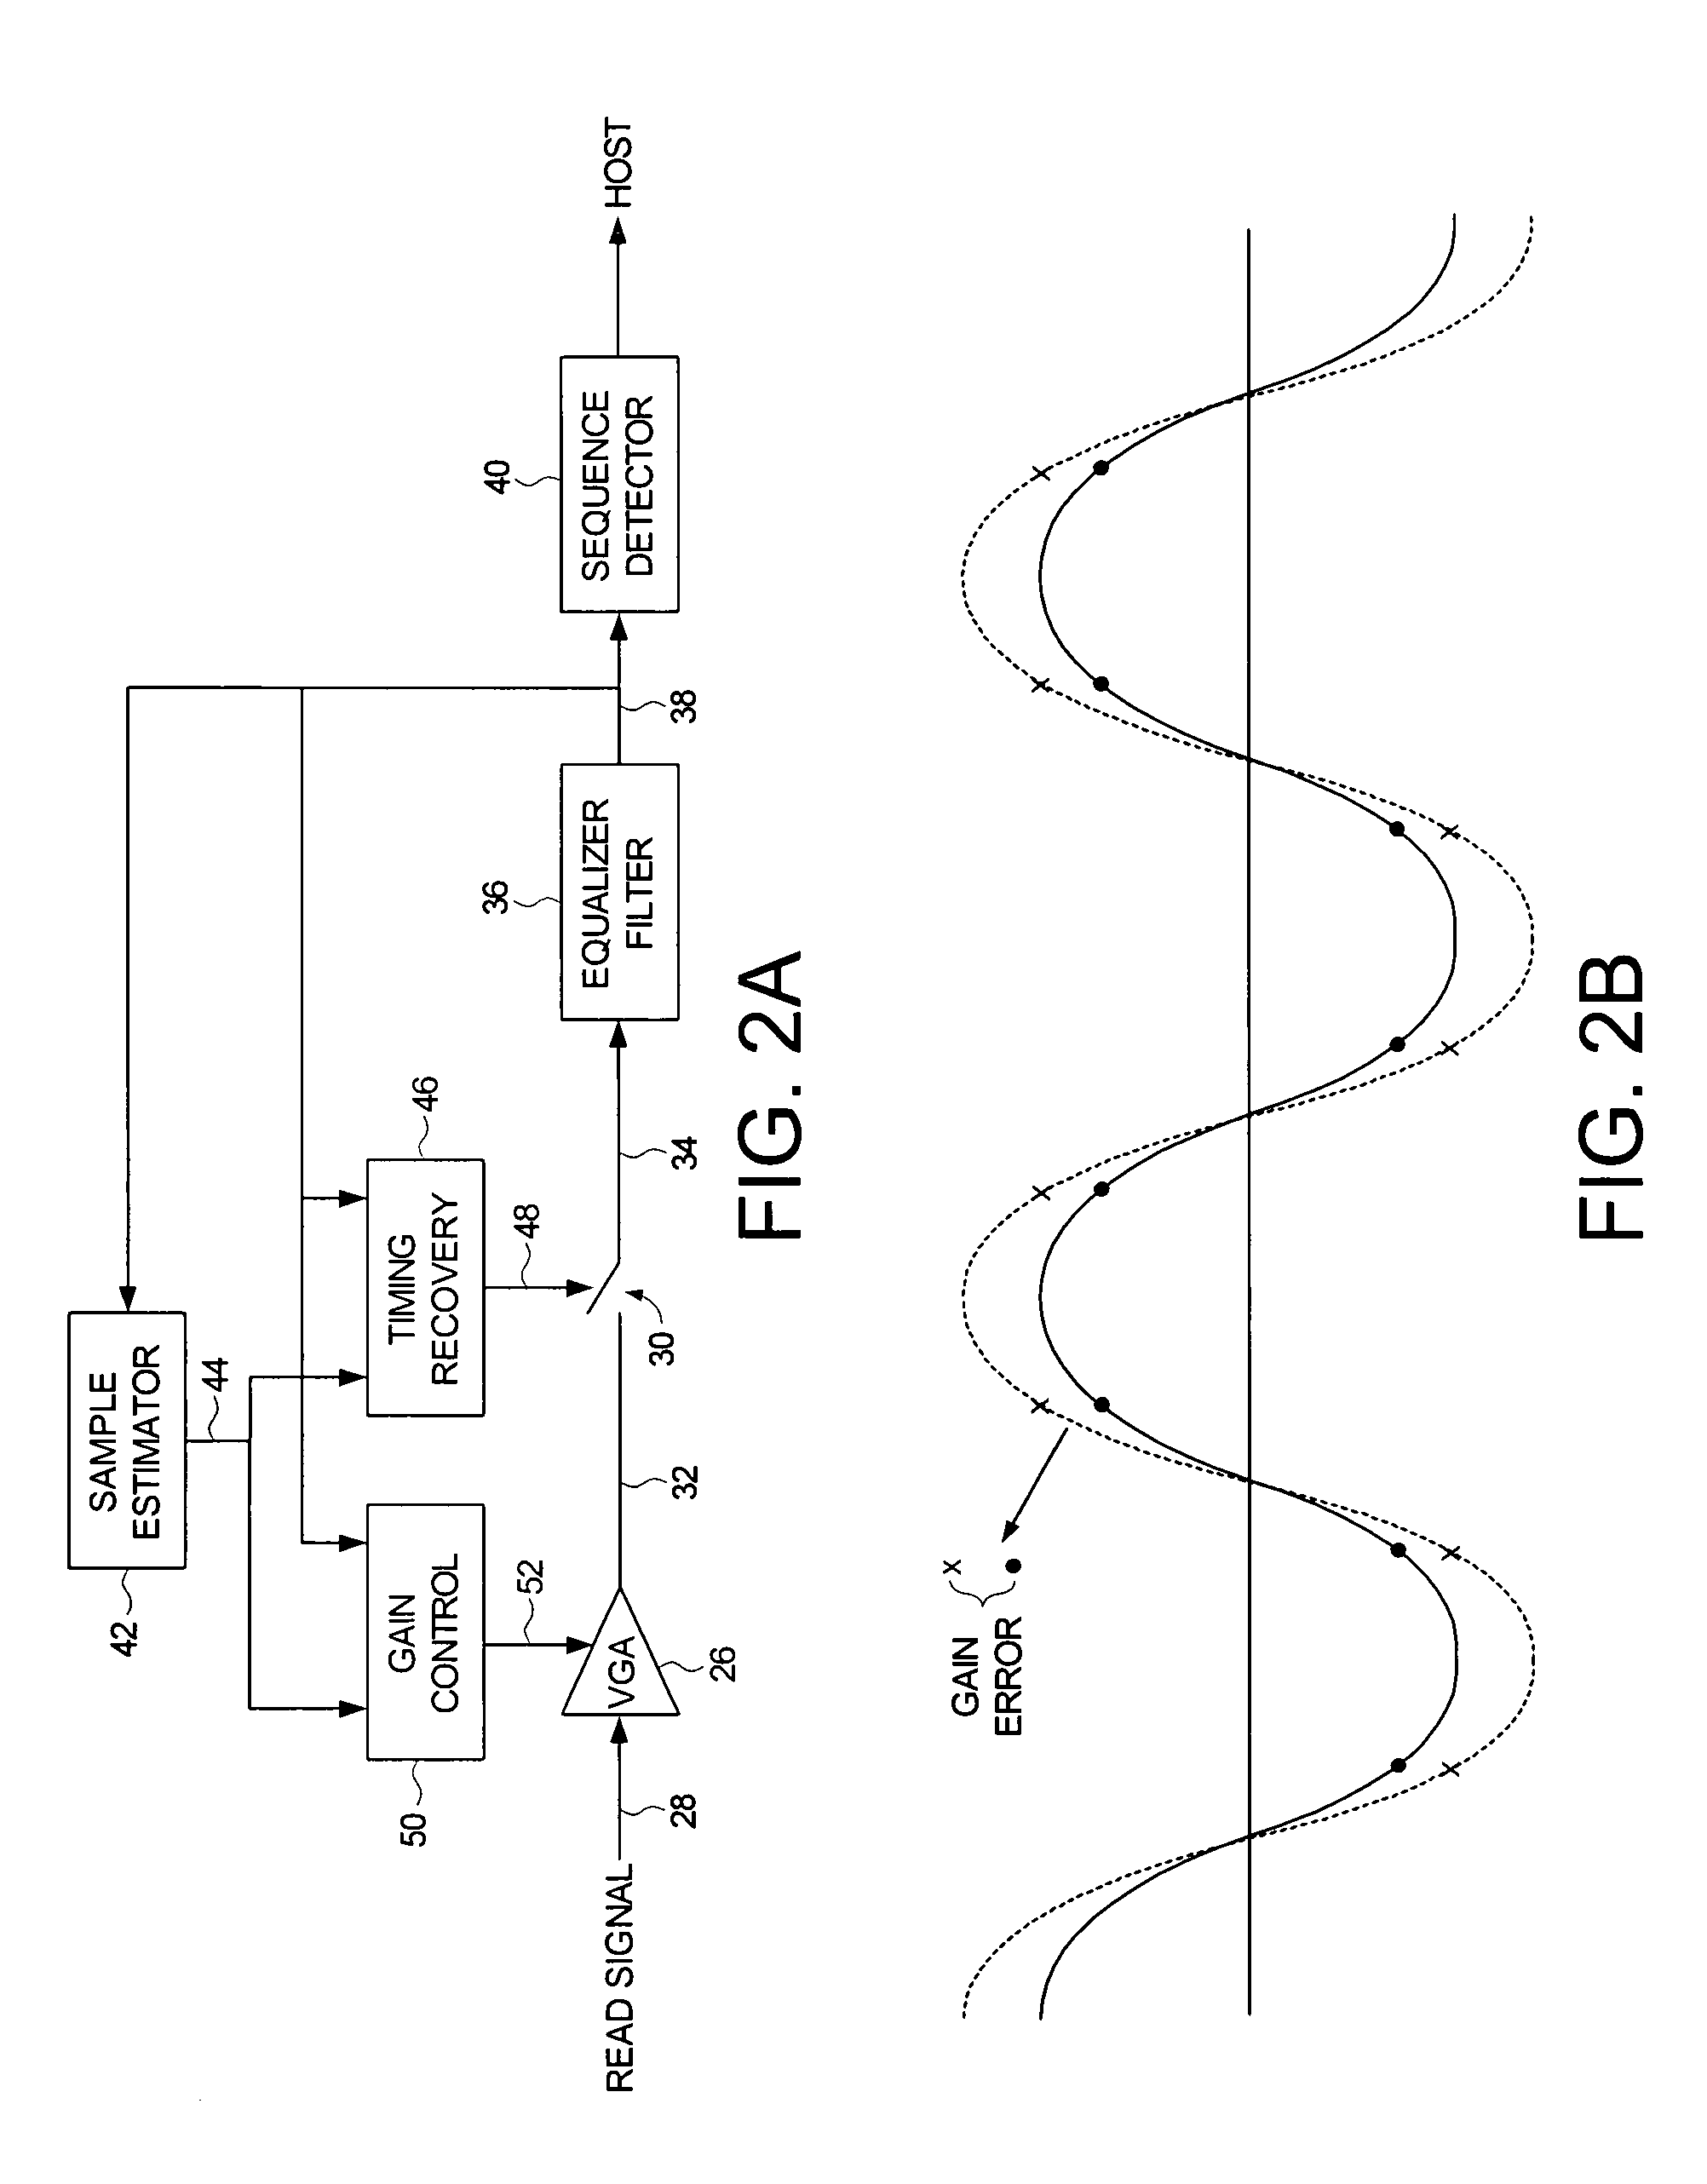 Disk drive detecting disk warping by detecting negative correlation between read signal amplitudes from top and bottom disk surfaces